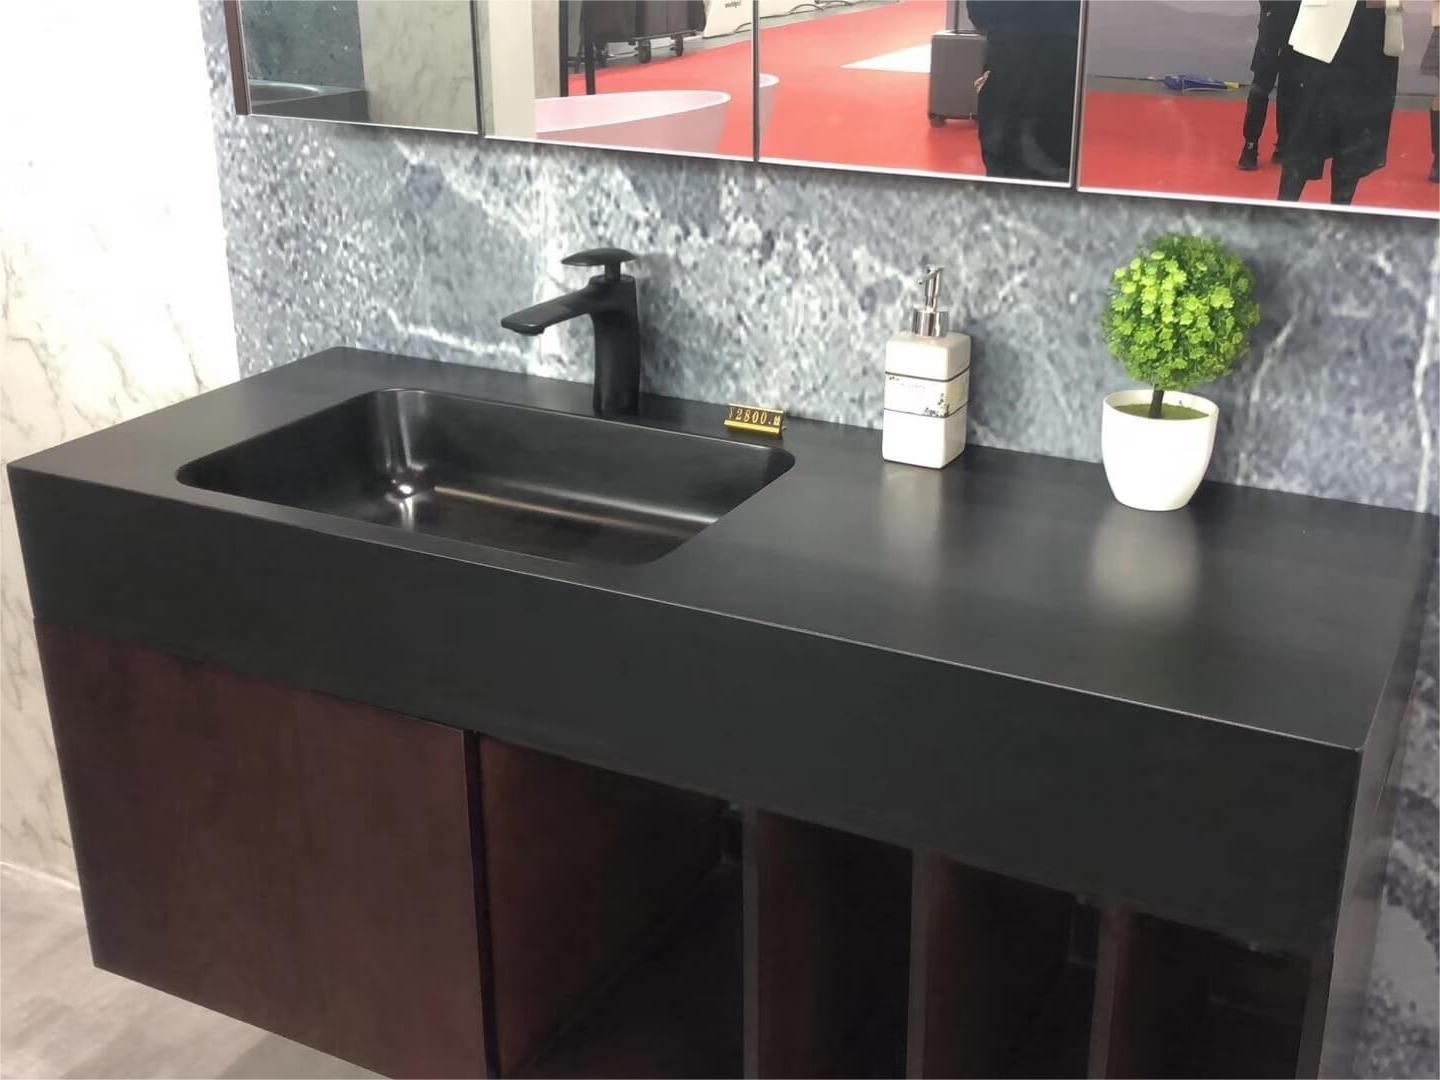 2019 Guangzhou Hotel Fair from Cpingao basin with cabinet